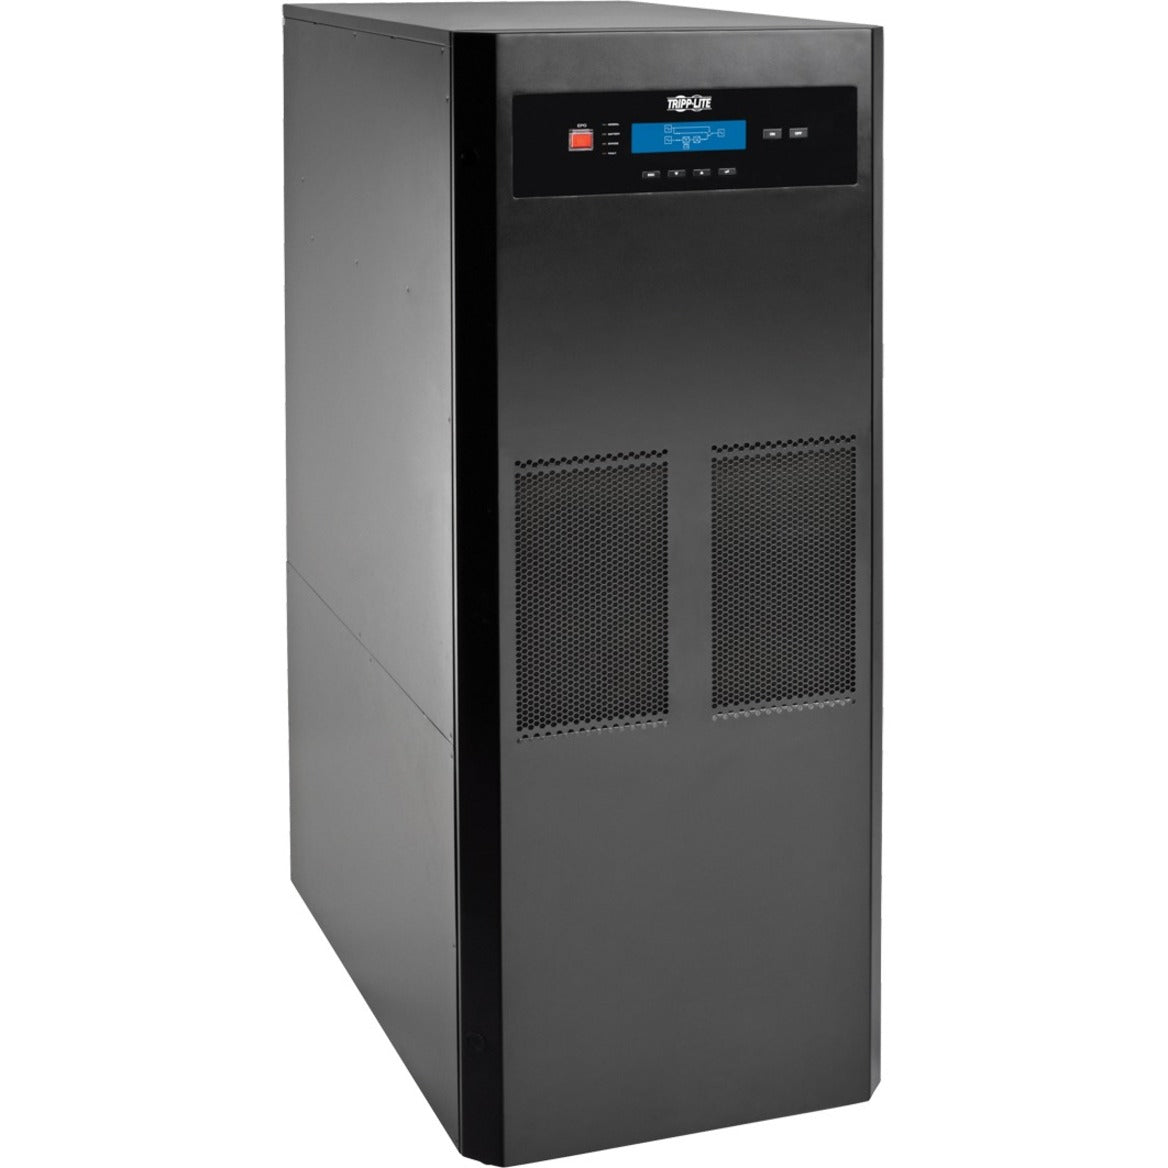 Tripp Lite SmartOnline SUTX Series 3-Phase 220/380V 230/400V 240/415V 20kVA 20kW On-Line Double-Conversion UPS Tower Extended Run SNMP Option